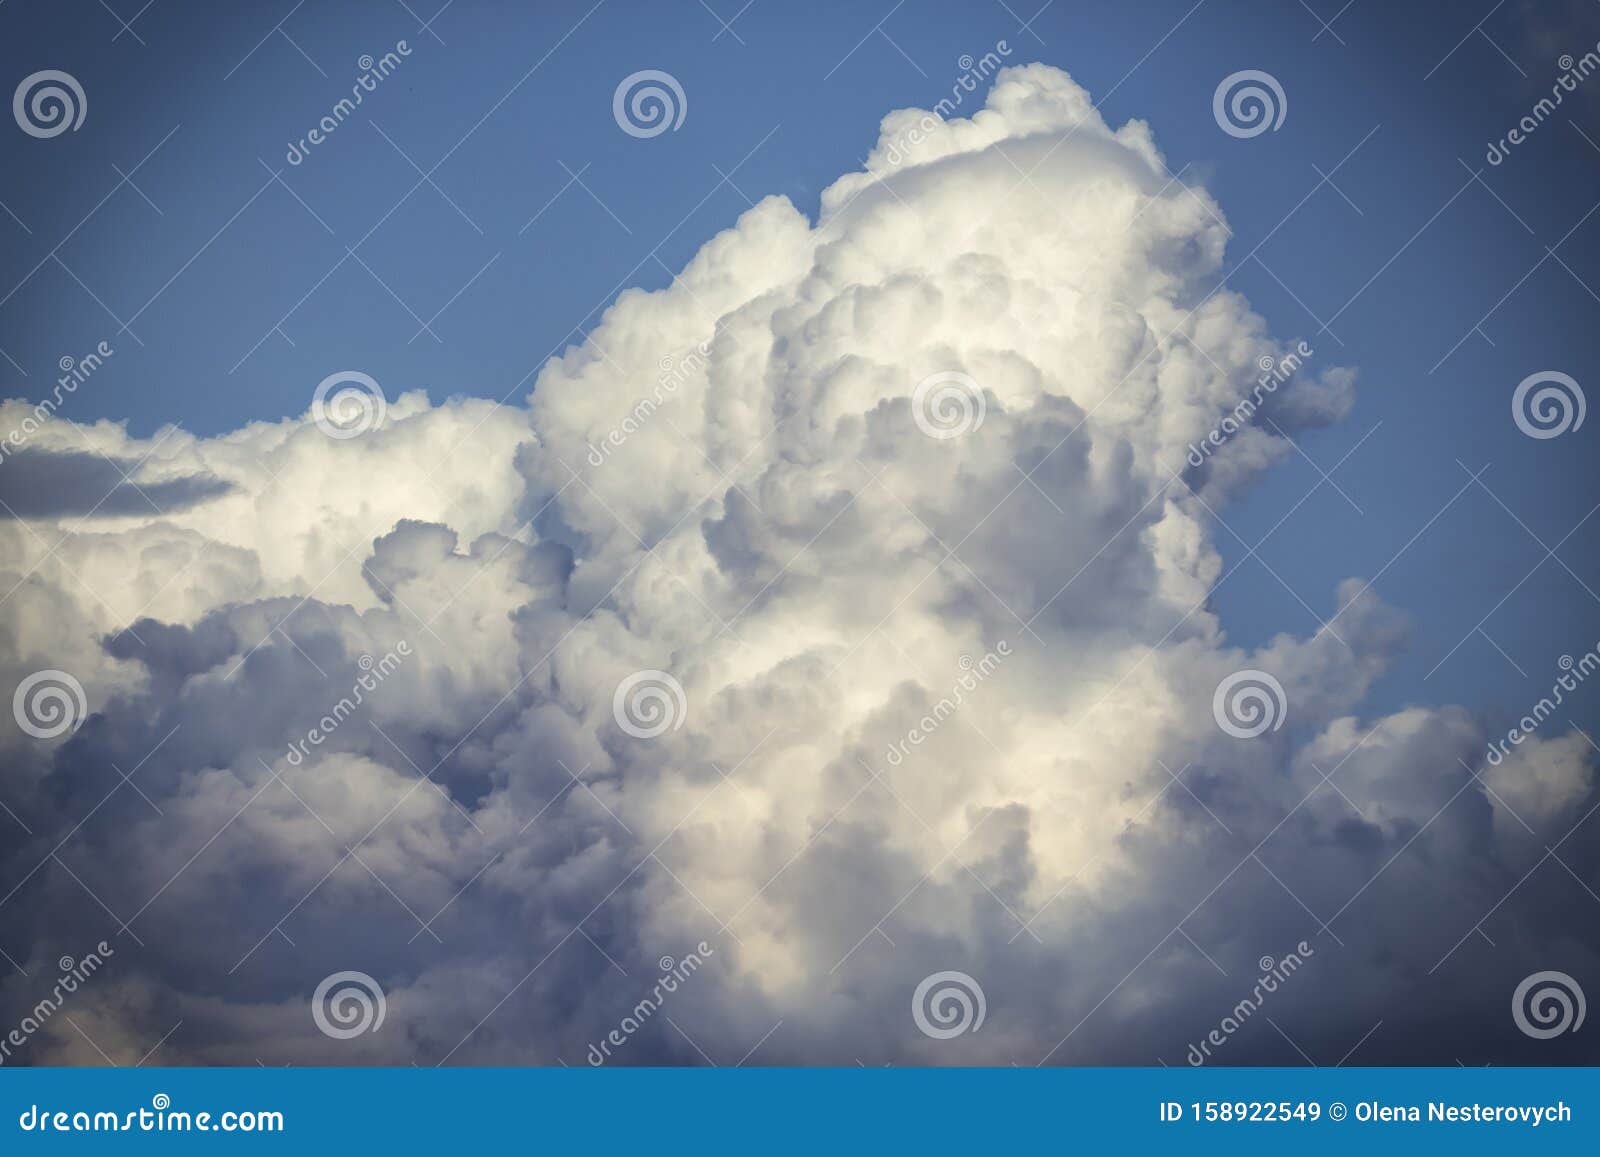 Blurred Effective Dramatic Sky Or And Storm Cloud Background Beautiful Nature Stock Image Image Of Cyan Overcast